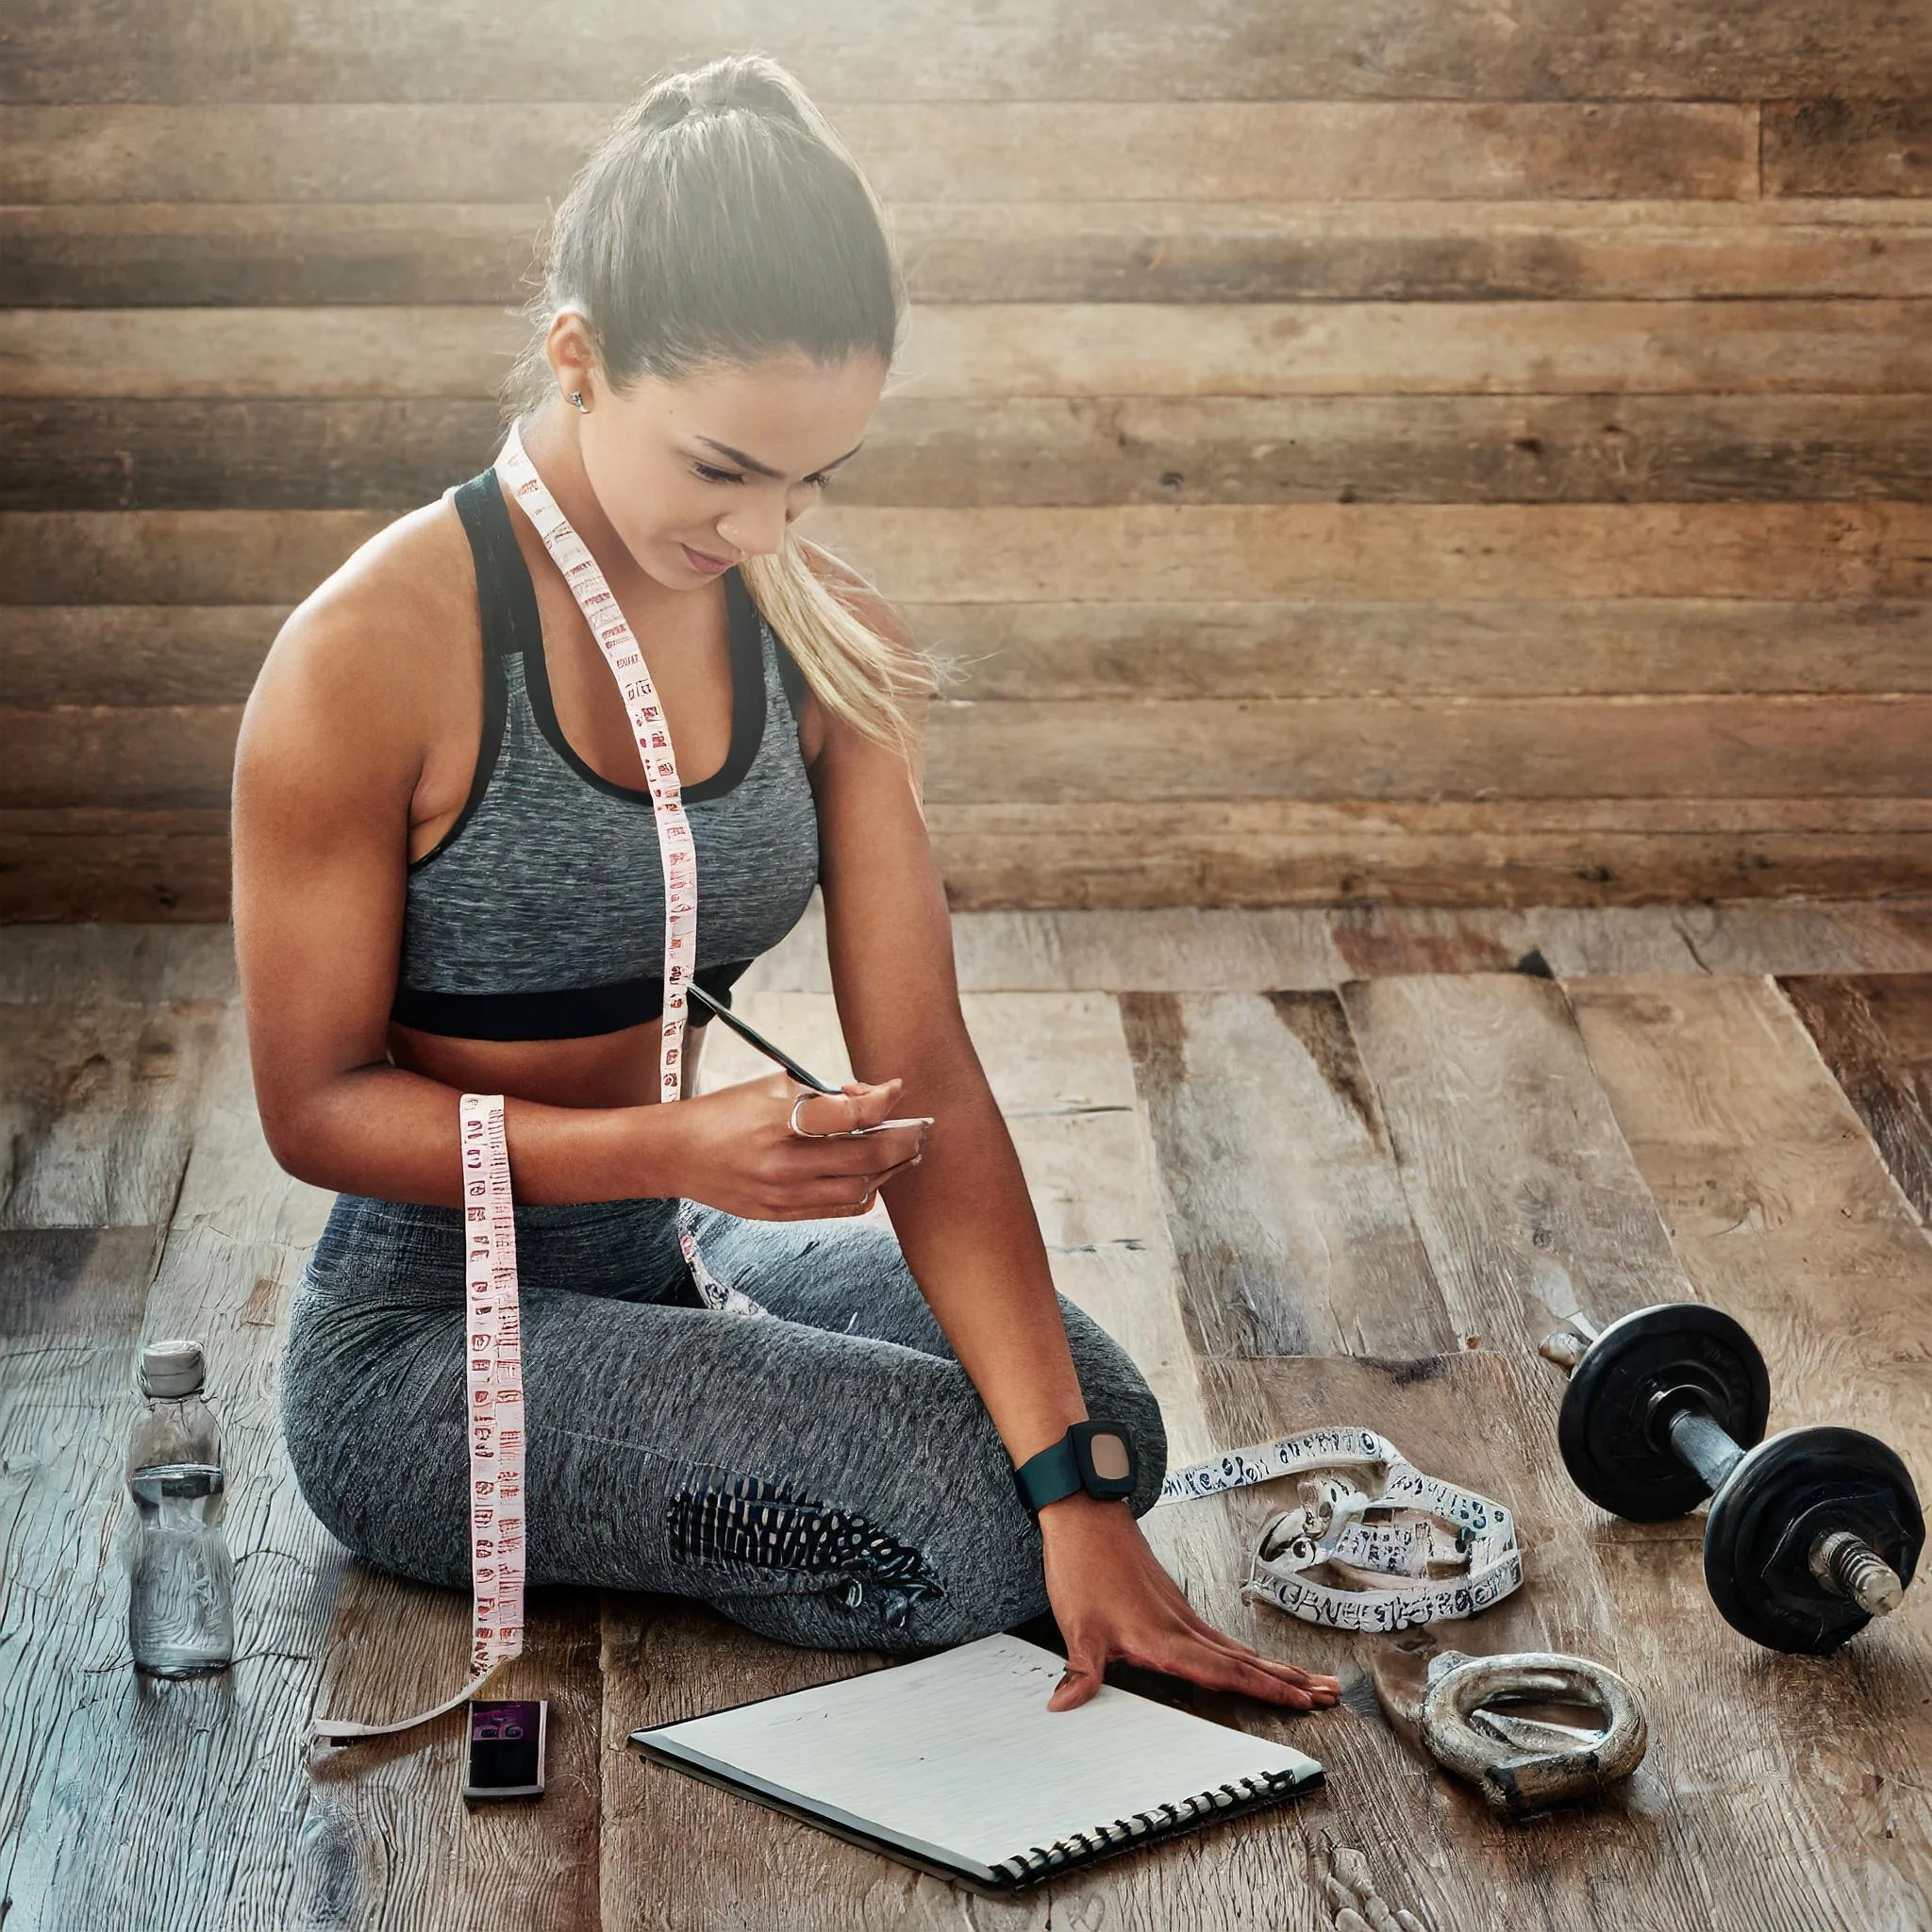 Mastering Your Fitness Goals: A Comprehensive Guide to Tracking Weight Loss with Apple Watch